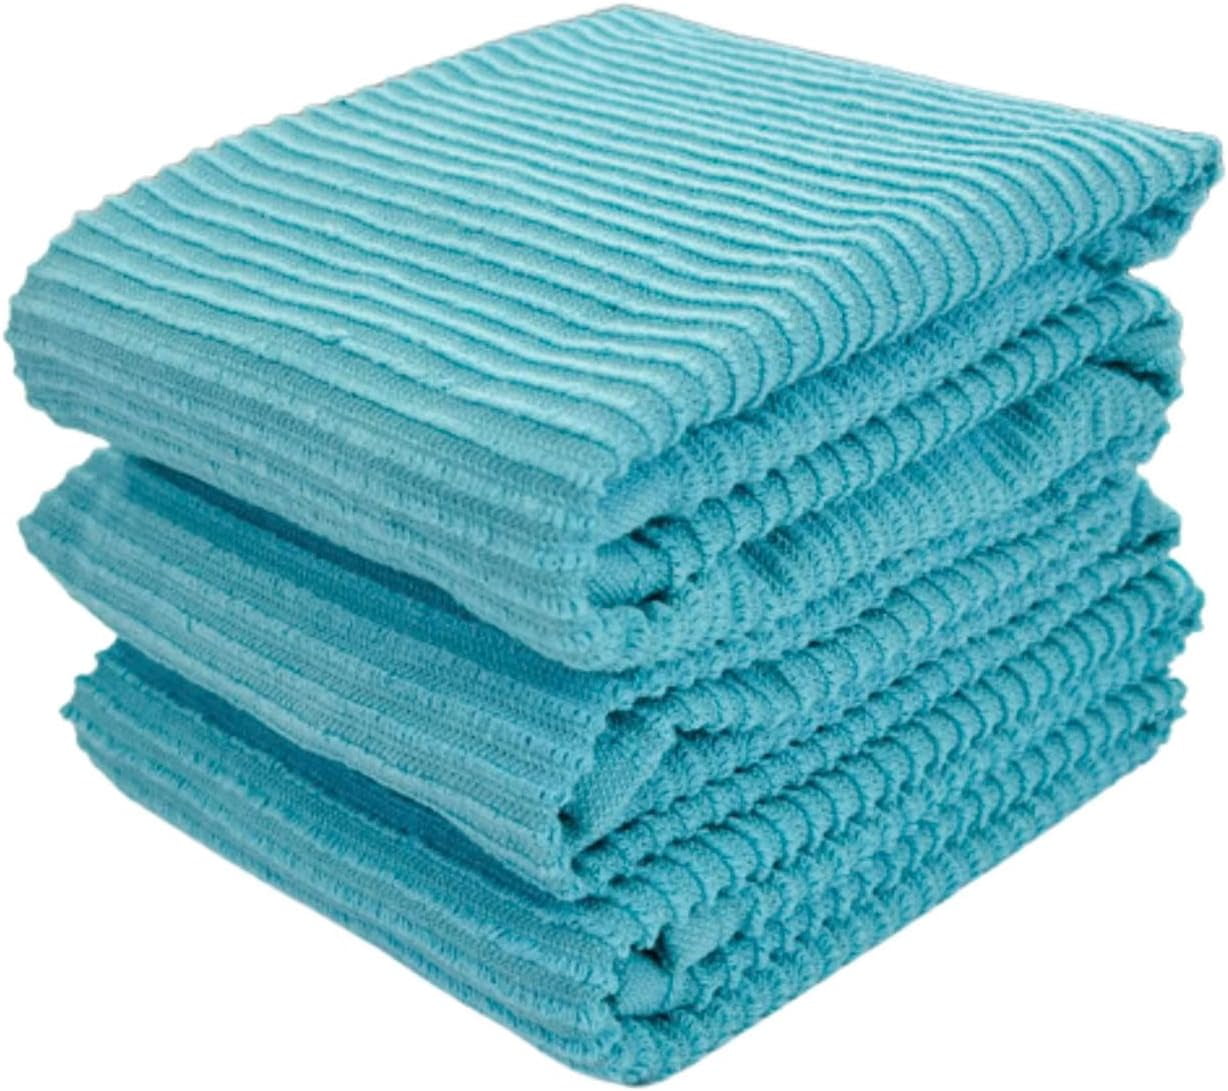 GELEAN Super Cleaning Towels Multipurpose Ribbed Kitchen Towels 12